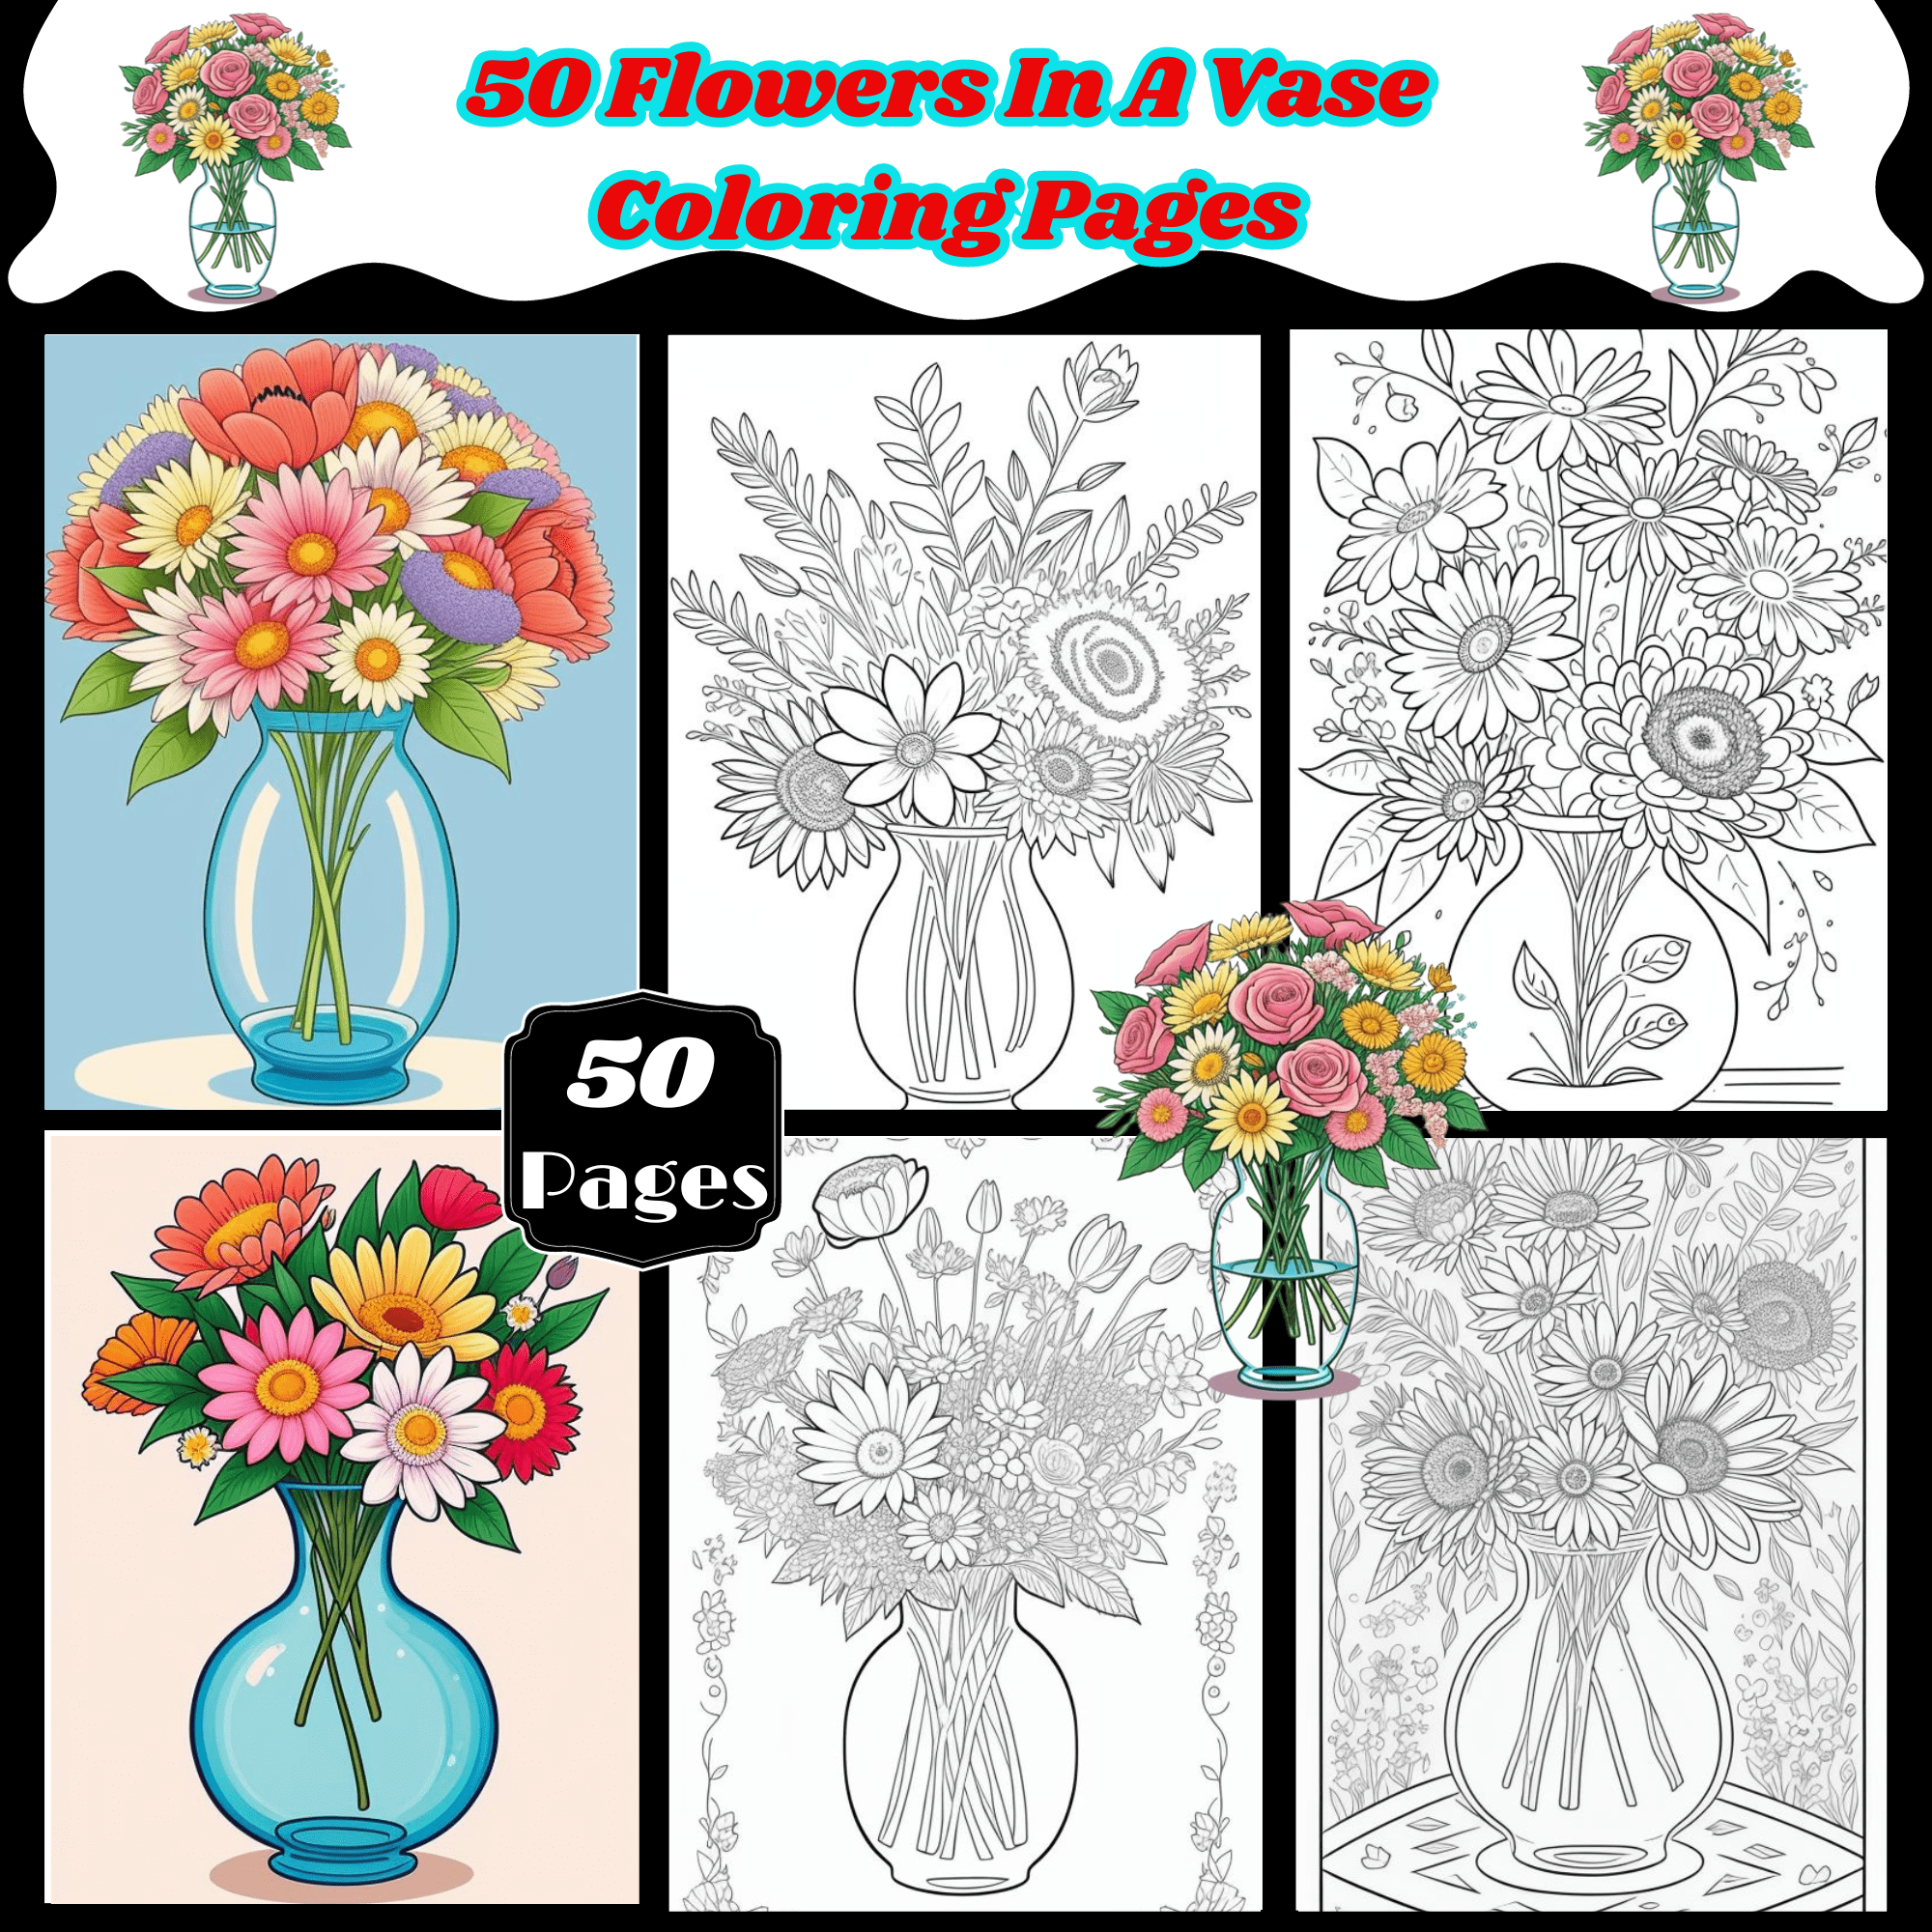 Flowers in a vase coloring pages flower vase coloring pages for kids and adults made by teachers